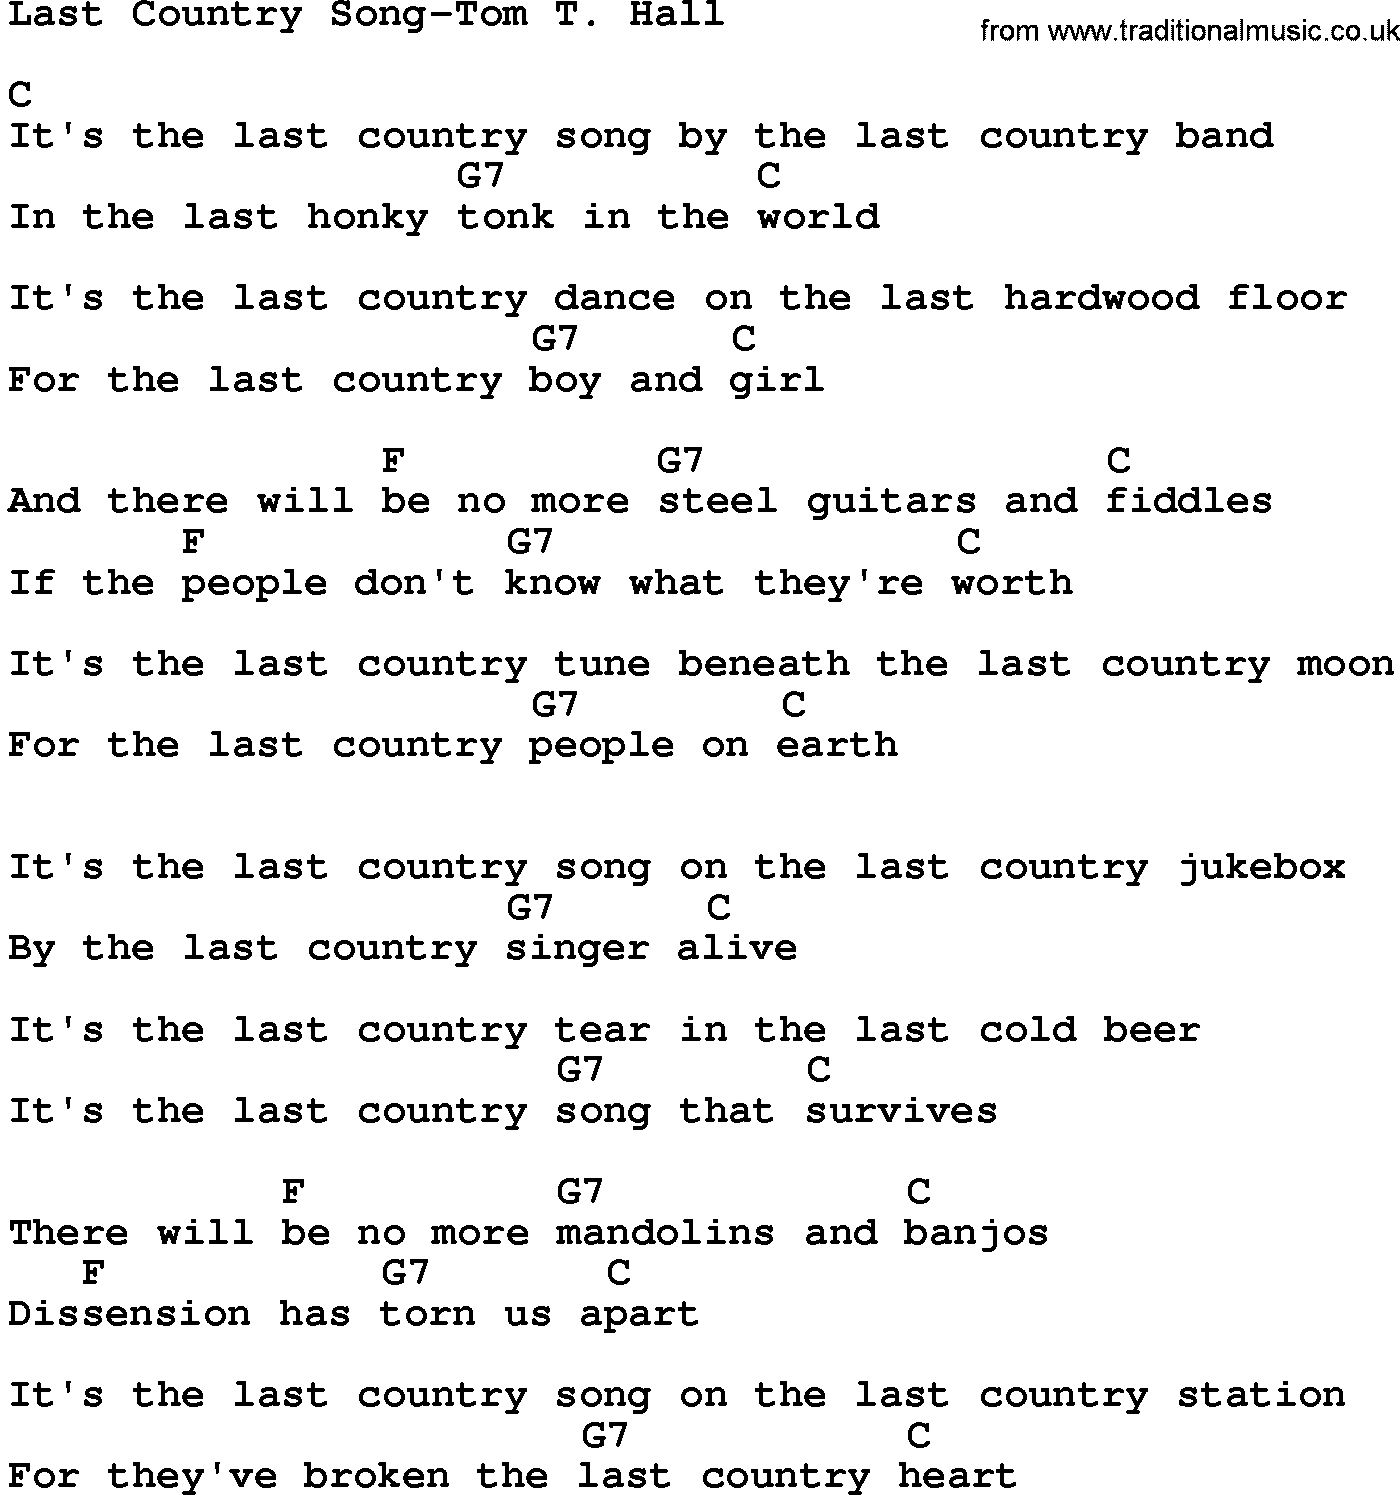 Country music song: Last Country Song-Tom T Hall lyrics and chords